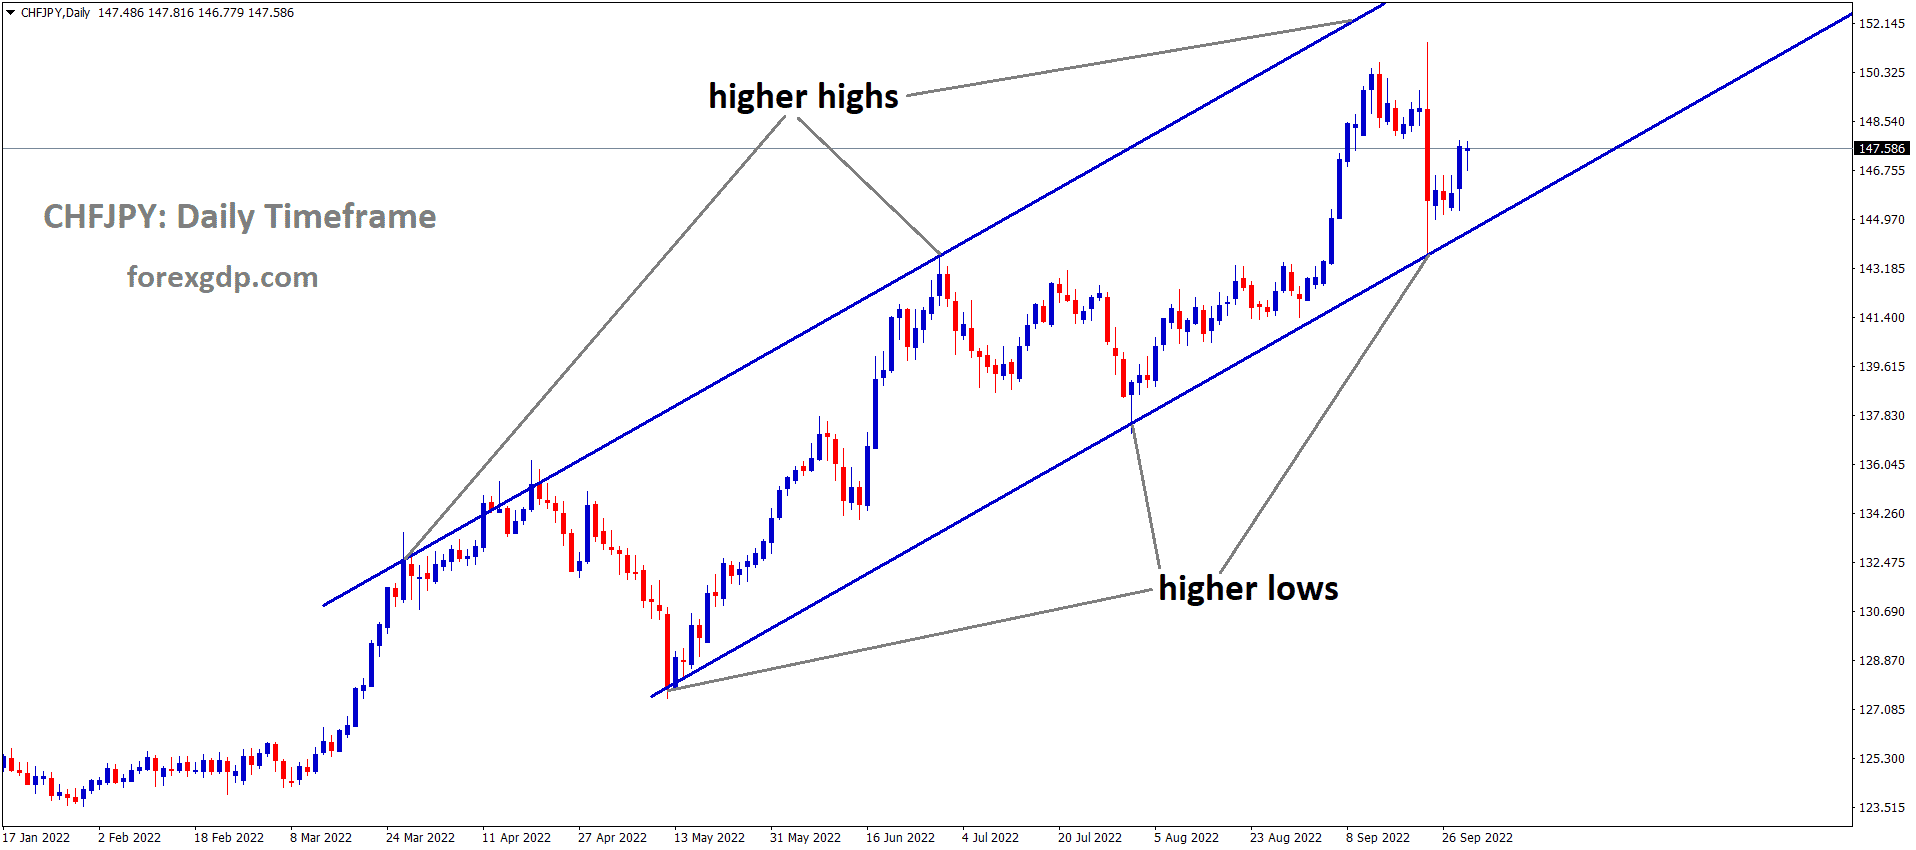 CHFJPY is moving in an Ascending channel and the market has rebounded from the higher low area of the channel 2